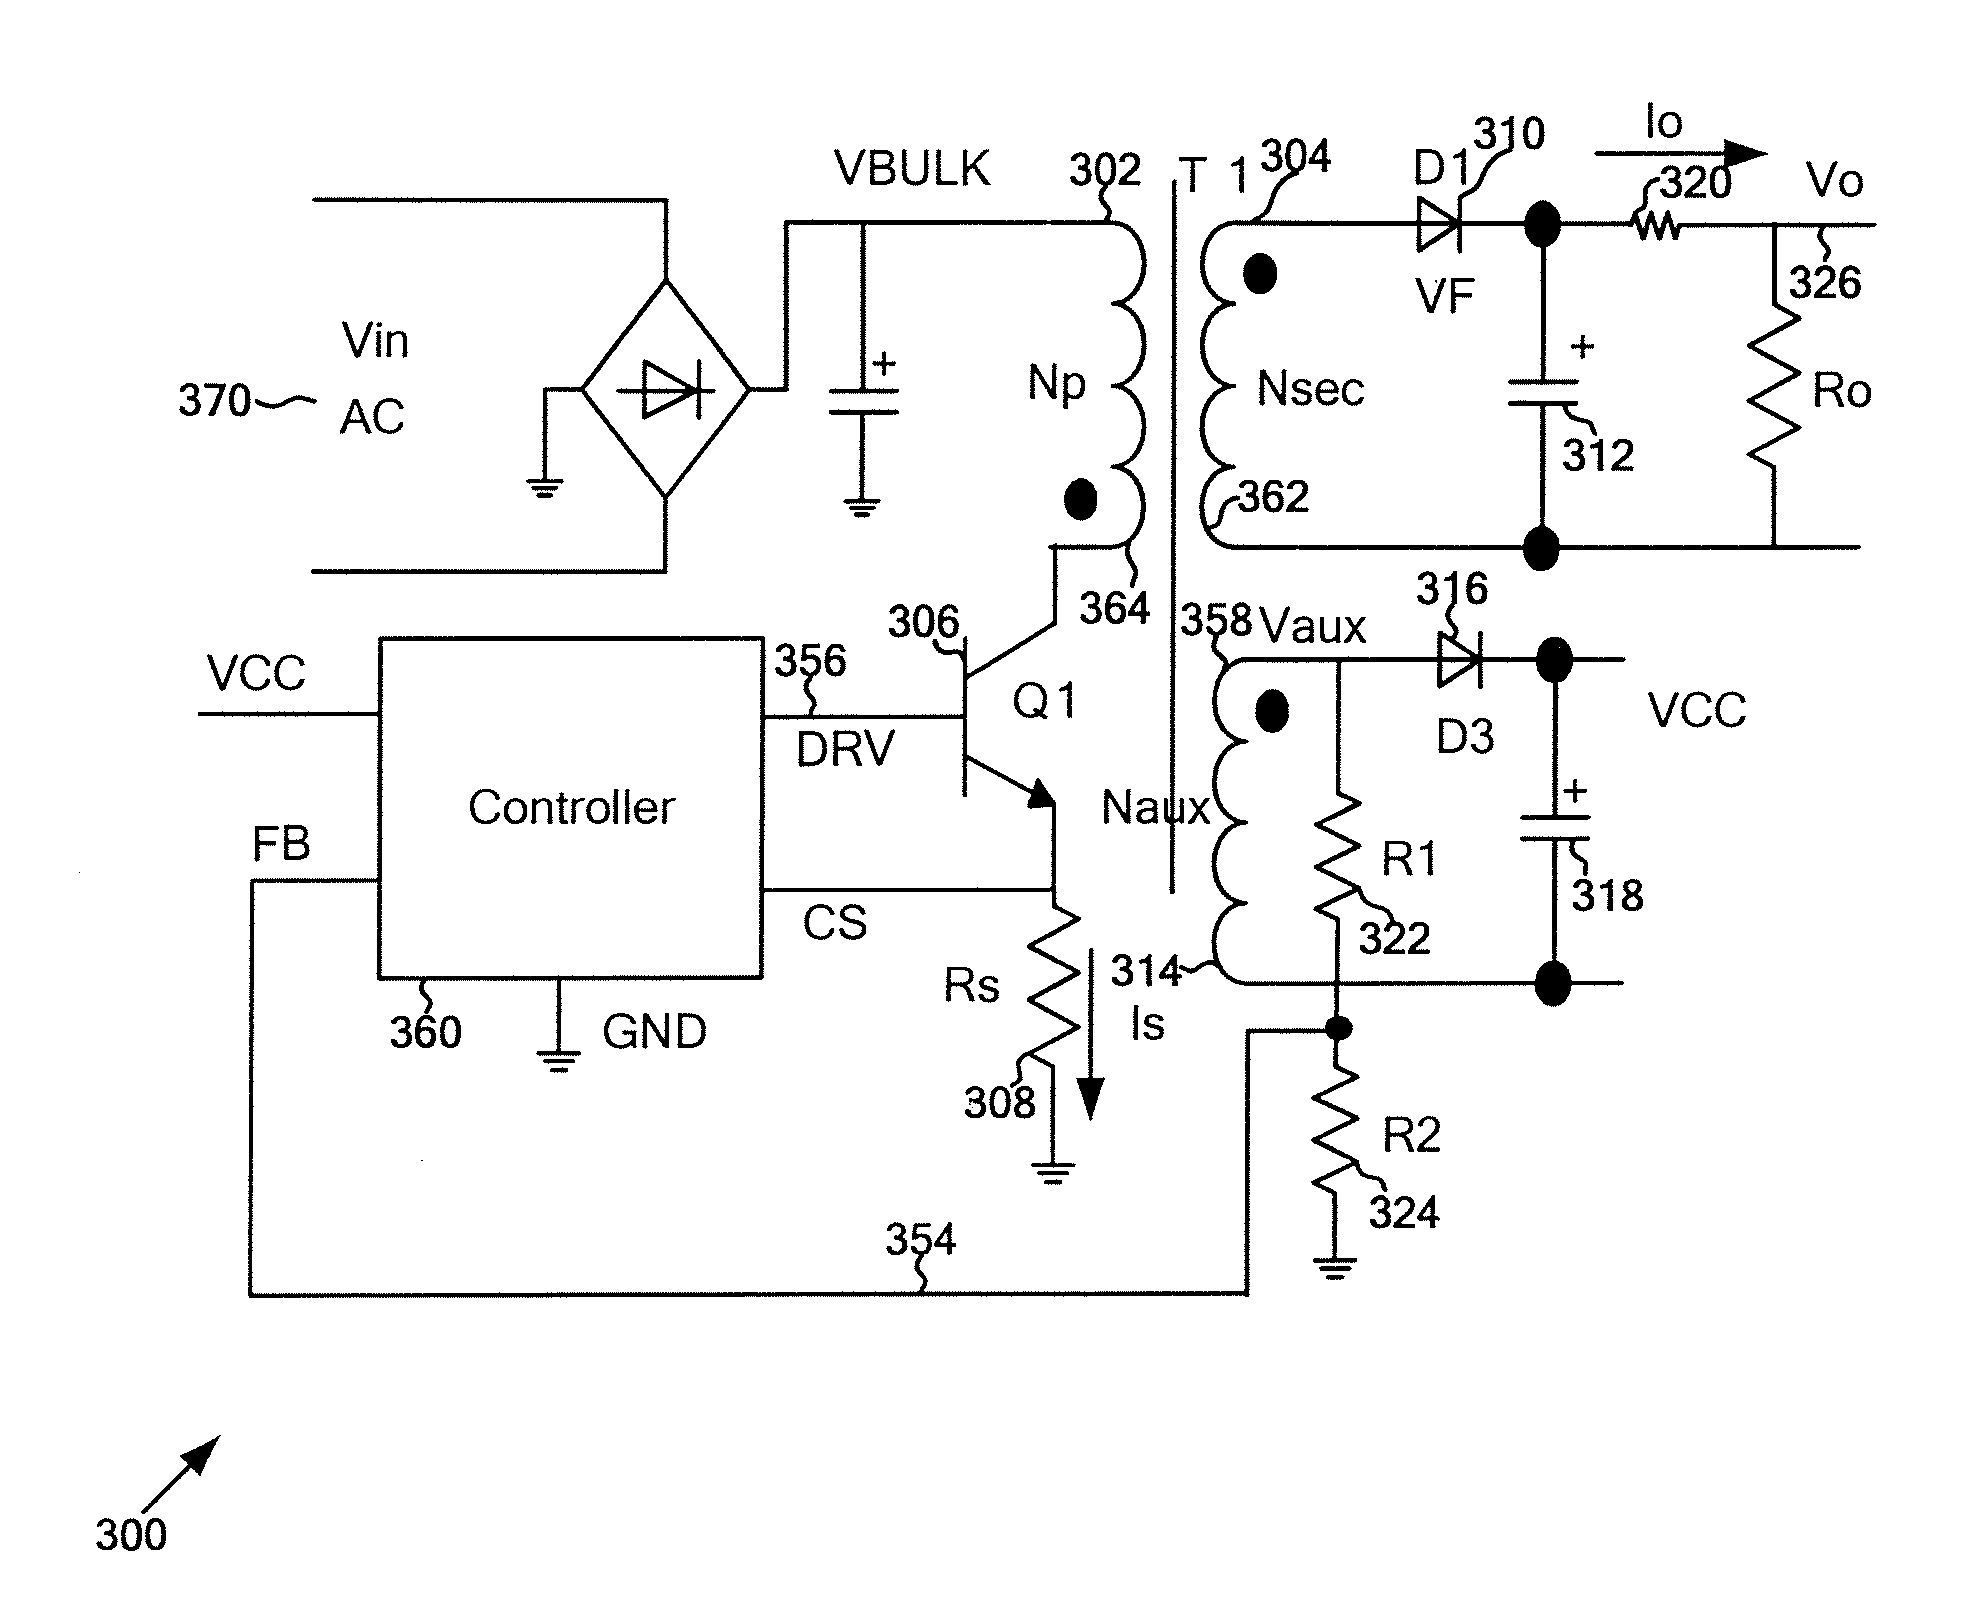 Systems and methods for voltage control and current control of power conversion systems with multiple operation modes